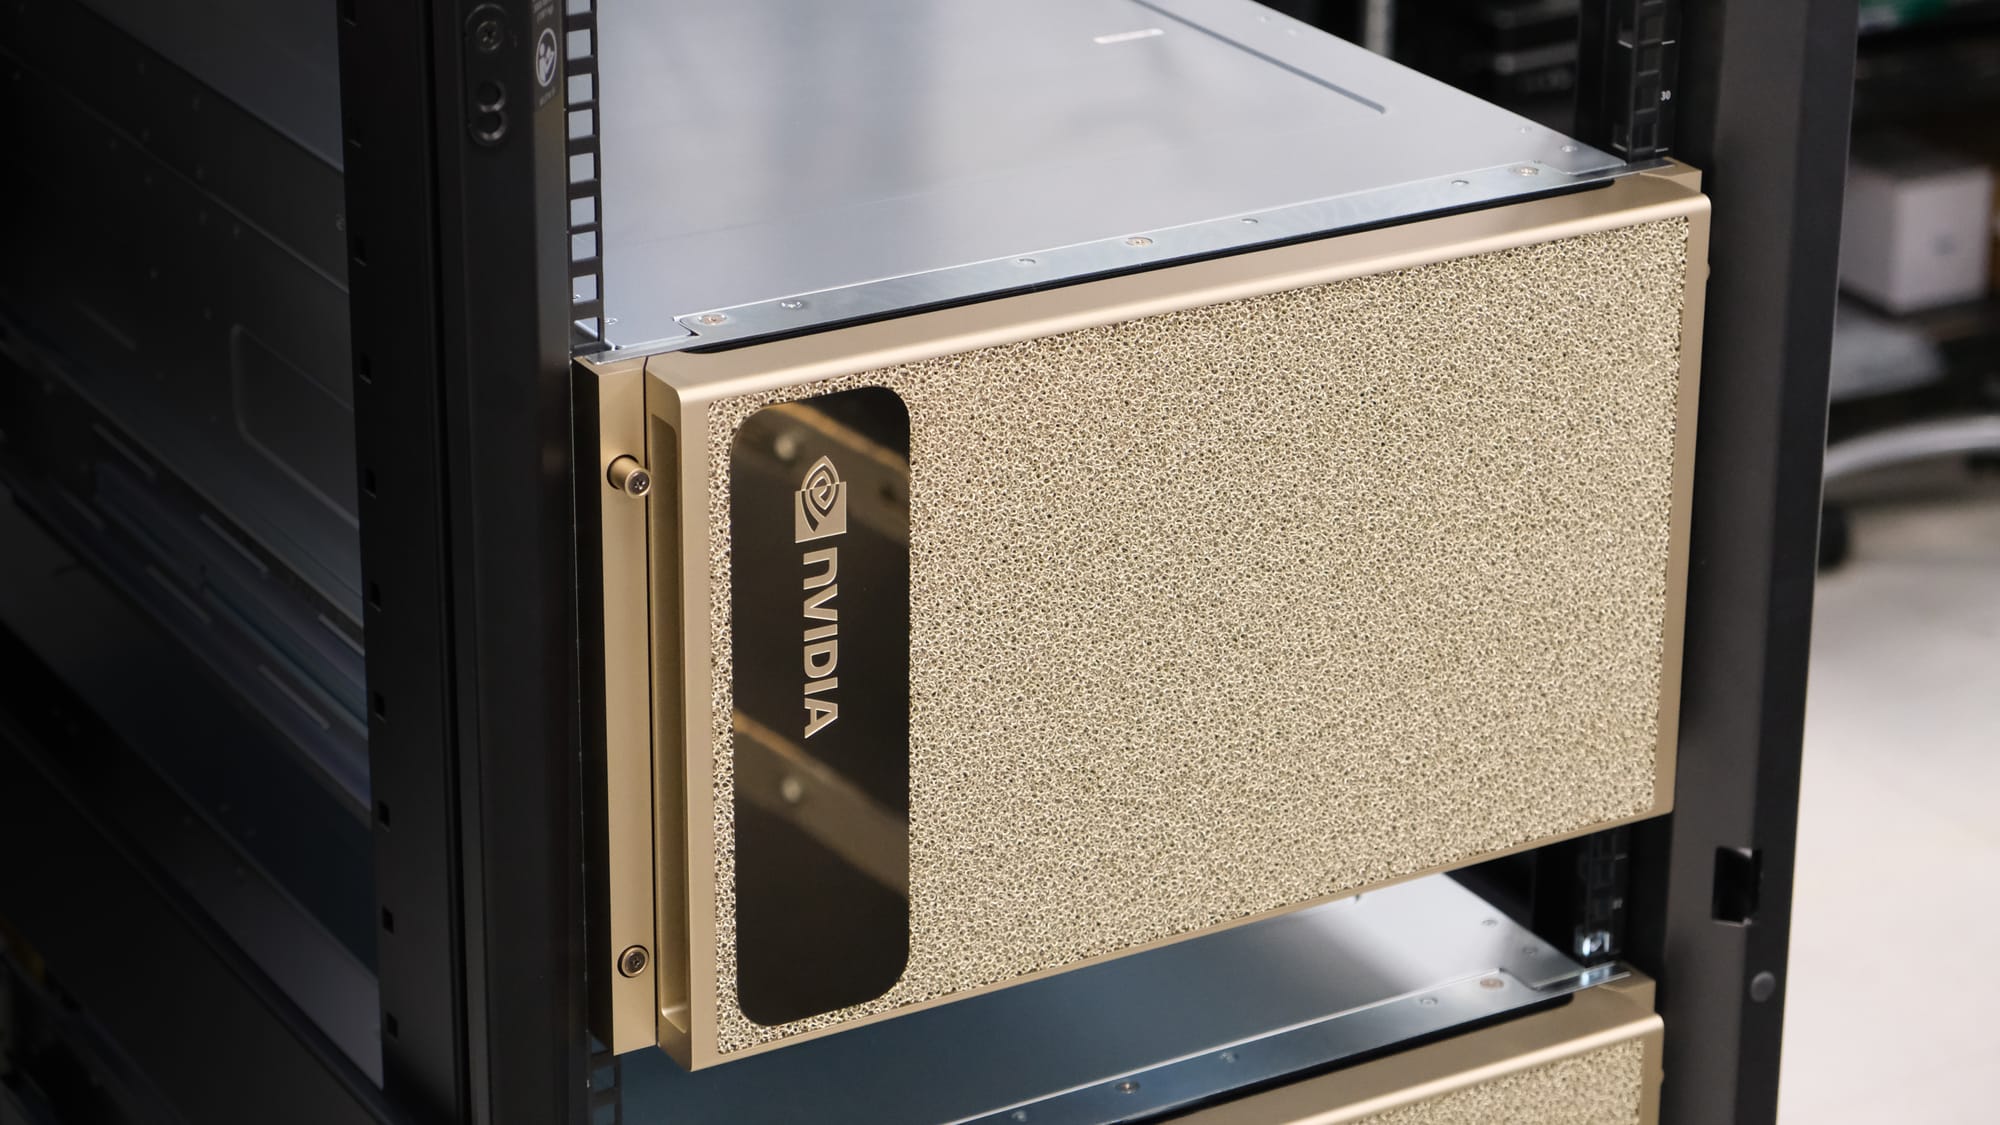 NVIDIA-branded gold-colored server unit installed in a black server rack, indicating high-performance computing or data center hardware.